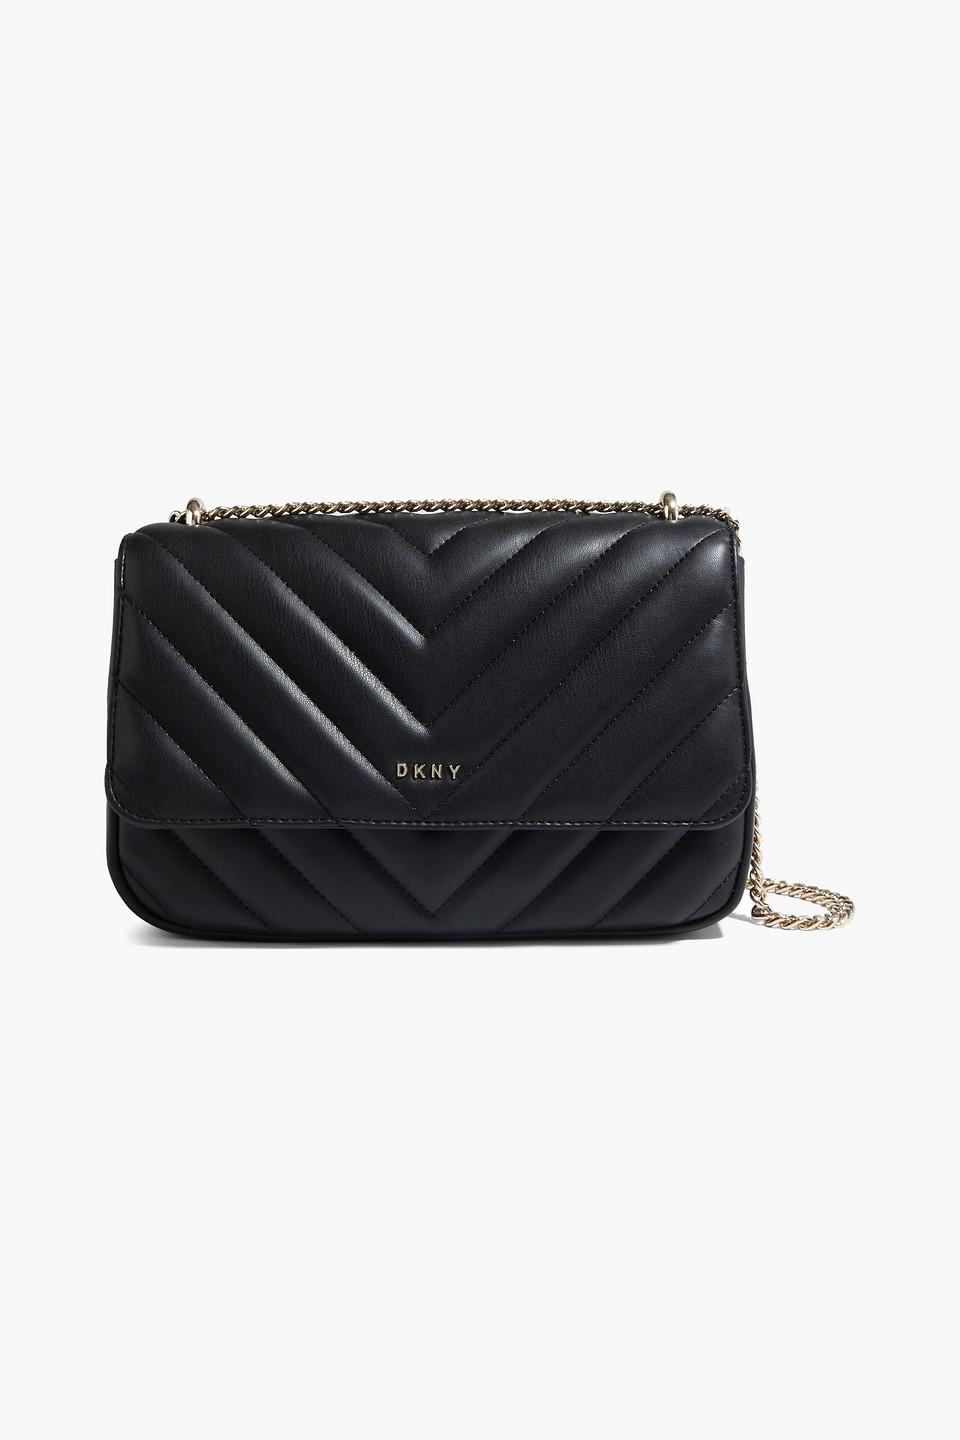 DKNY Veronica Quilted Faux-leather Shoulder Bag in Black | Lyst